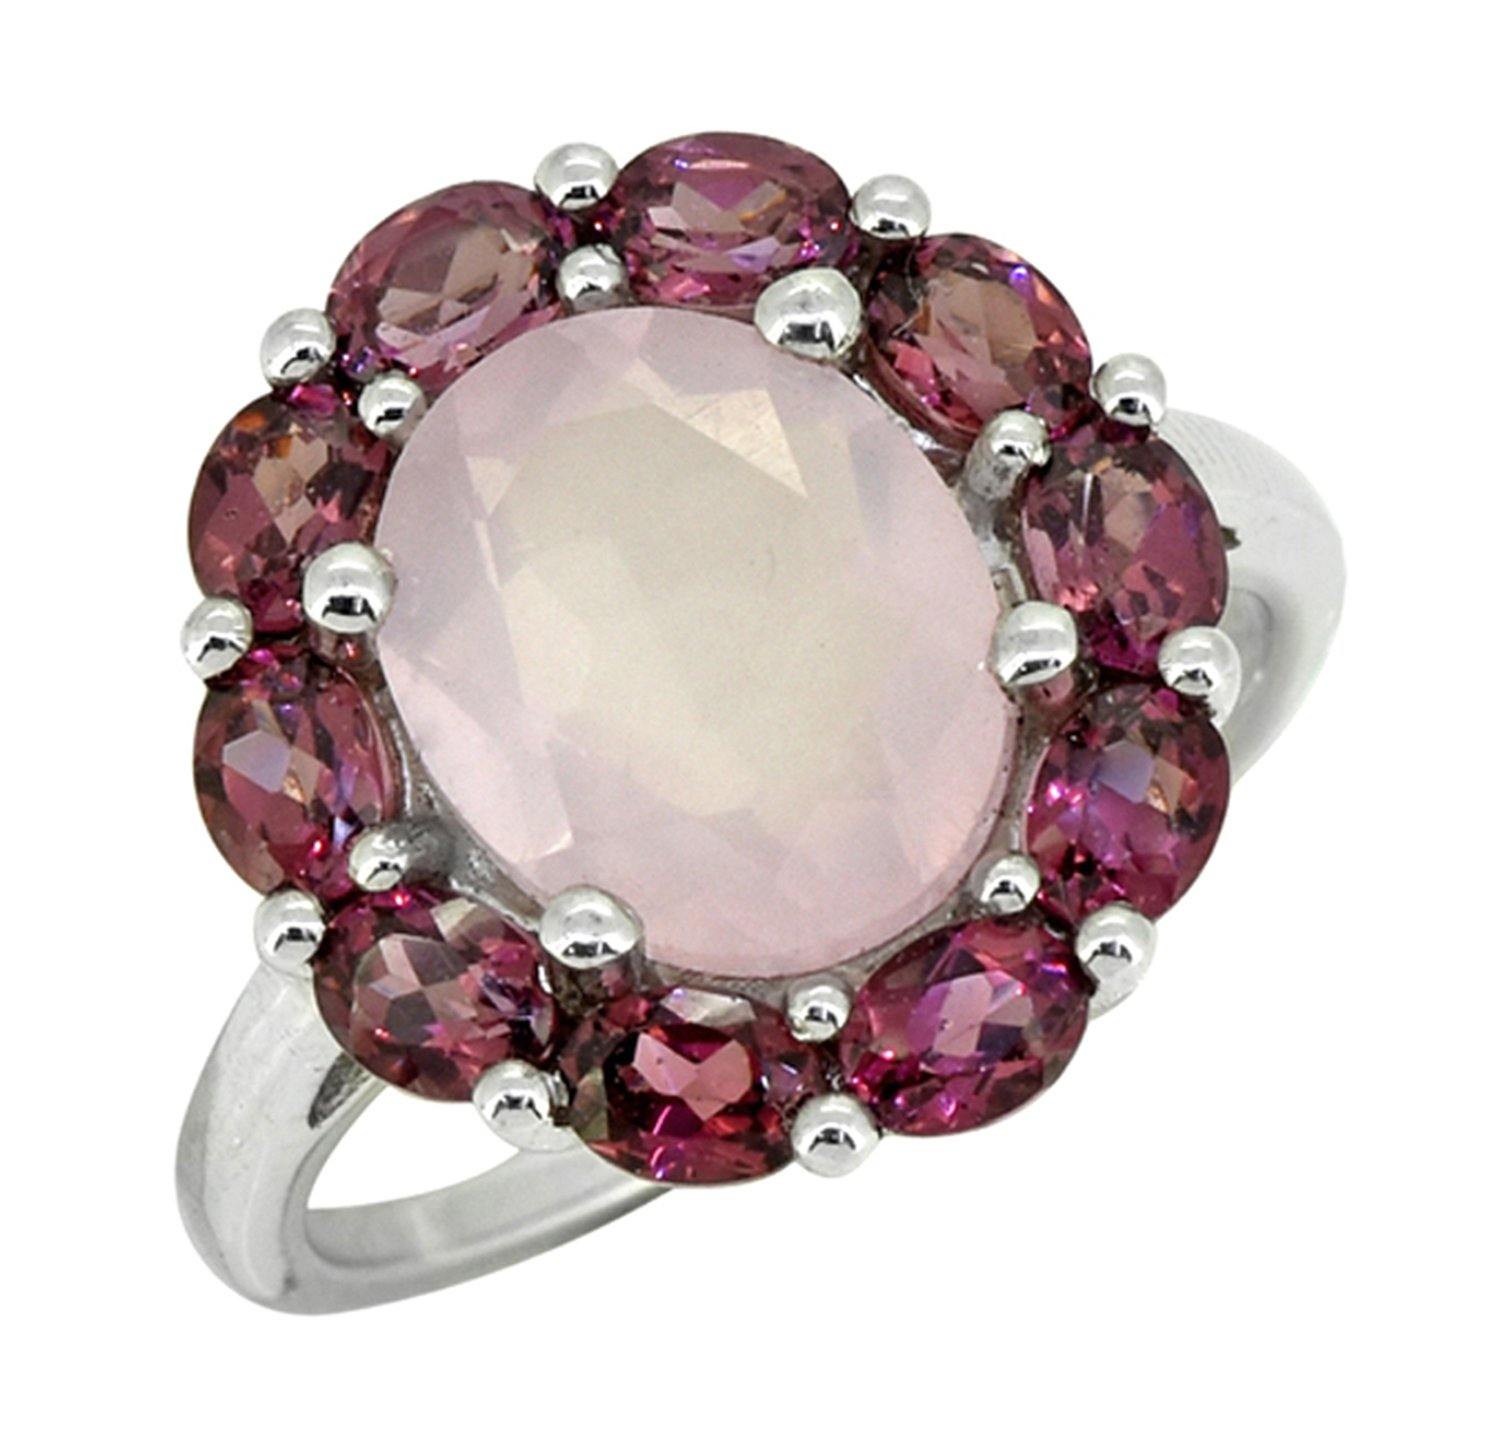 5.43 Ct. Rose Quartz Solid 925 Sterling Silver Flower Cluster Ring Jewelry - YoTreasure